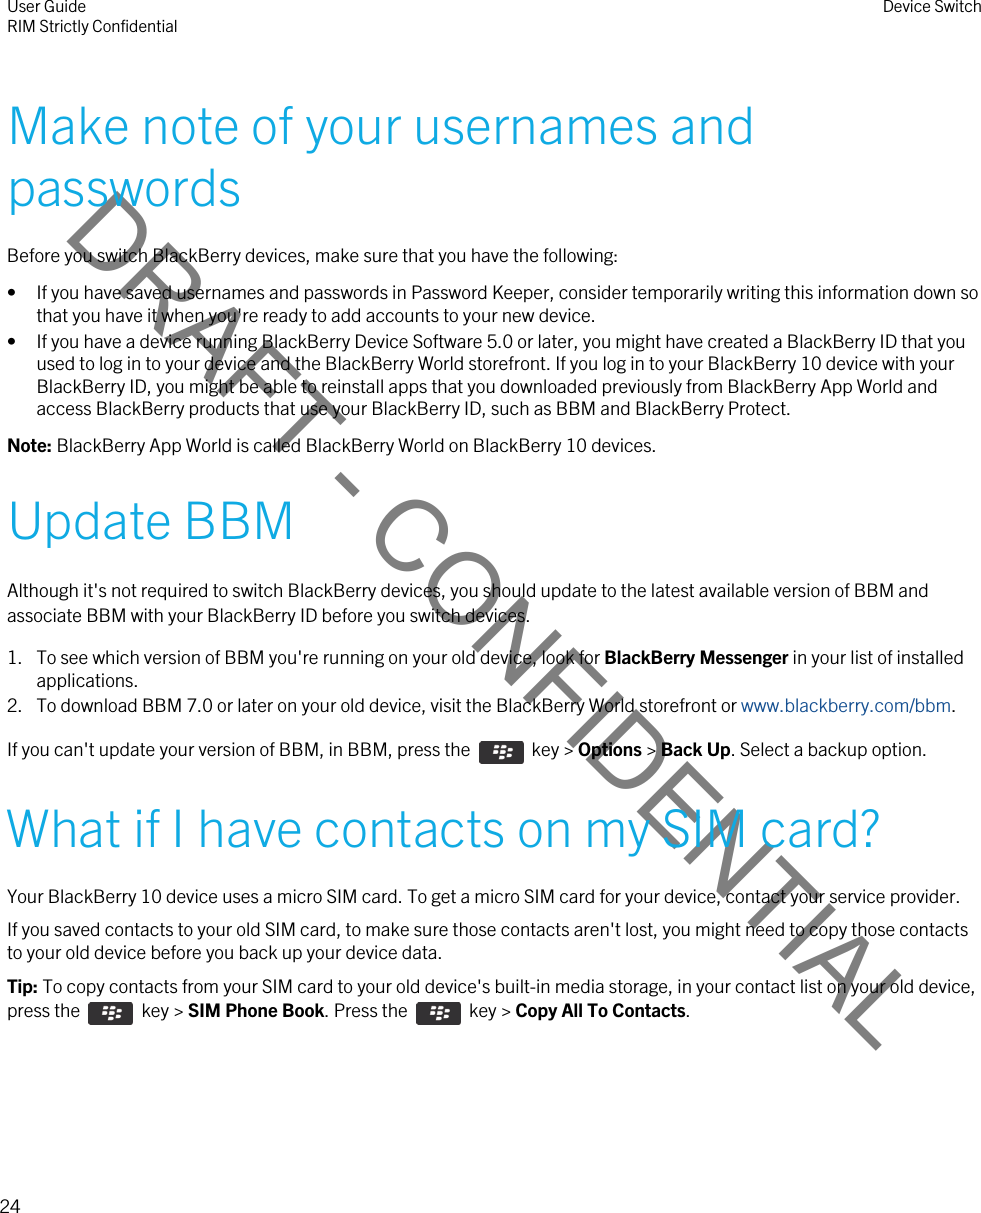 DRAFT - CONFIDENTIALMake note of your usernames and passwordsBefore you switch BlackBerry devices, make sure that you have the following:• If you have saved usernames and passwords in Password Keeper, consider temporarily writing this information down so that you have it when you&apos;re ready to add accounts to your new device.• If you have a device running BlackBerry Device Software 5.0 or later, you might have created a BlackBerry ID that you used to log in to your device and the BlackBerry World storefront. If you log in to your BlackBerry 10 device with your BlackBerry ID, you might be able to reinstall apps that you downloaded previously from BlackBerry App World and access BlackBerry products that use your BlackBerry ID, such as BBM and BlackBerry Protect.Note: BlackBerry App World is called BlackBerry World on BlackBerry 10 devices.Update BBMAlthough it&apos;s not required to switch BlackBerry devices, you should update to the latest available version of BBM and associate BBM with your BlackBerry ID before you switch devices.1. To see which version of BBM you&apos;re running on your old device, look for BlackBerry Messenger in your list of installed applications.2. To download BBM 7.0 or later on your old device, visit the BlackBerry World storefront or www.blackberry.com/bbm.If you can&apos;t update your version of BBM, in BBM, press the    key &gt; Options &gt; Back Up. Select a backup option.What if I have contacts on my SIM card?Your BlackBerry 10 device uses a micro SIM card. To get a micro SIM card for your device, contact your service provider.If you saved contacts to your old SIM card, to make sure those contacts aren&apos;t lost, you might need to copy those contacts to your old device before you back up your device data.Tip: To copy contacts from your SIM card to your old device&apos;s built-in media storage, in your contact list on your old device, press the    key &gt; SIM Phone Book. Press the    key &gt; Copy All To Contacts.User GuideRIM Strictly Confidential Device Switch24 